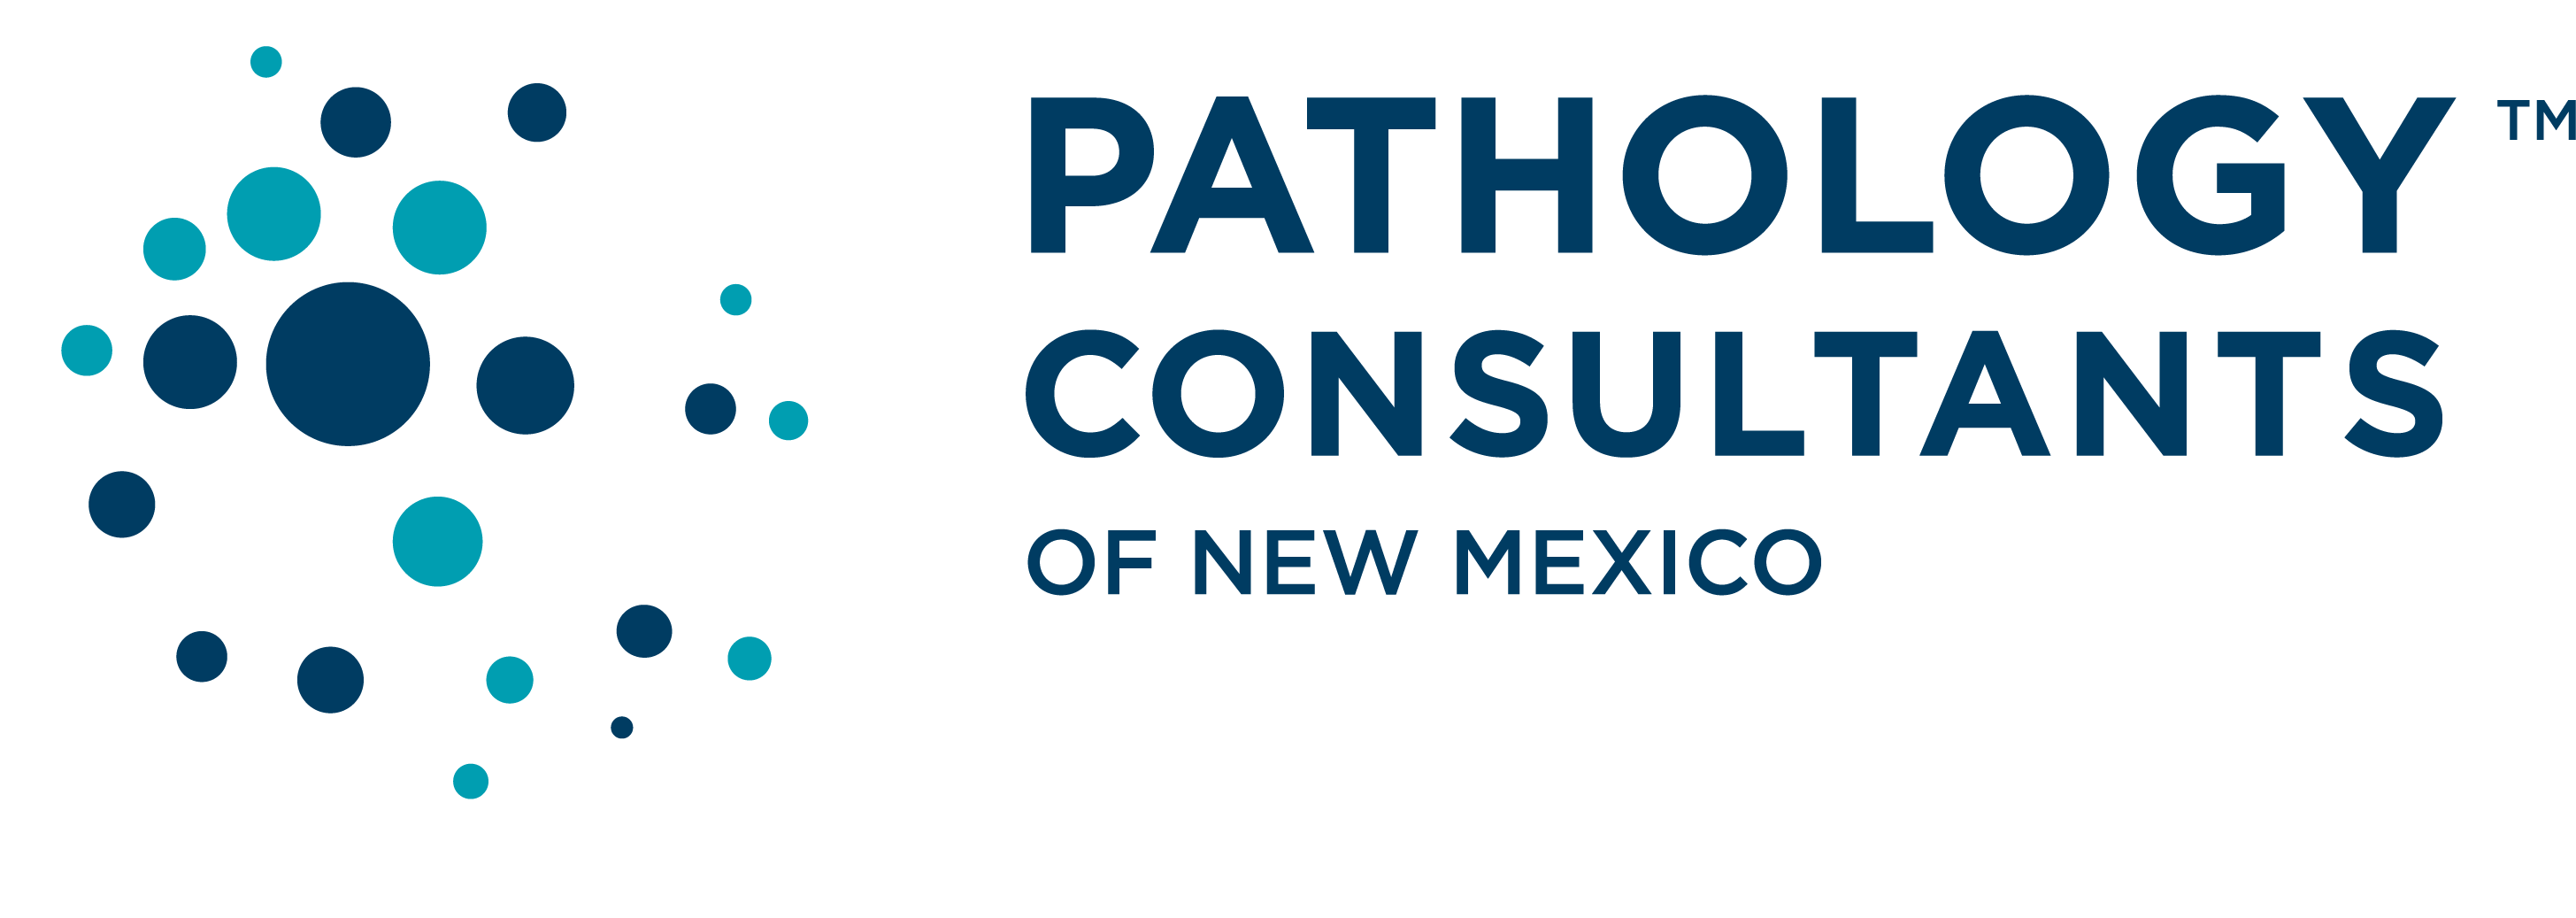 Pathology Consultants of New Mexico